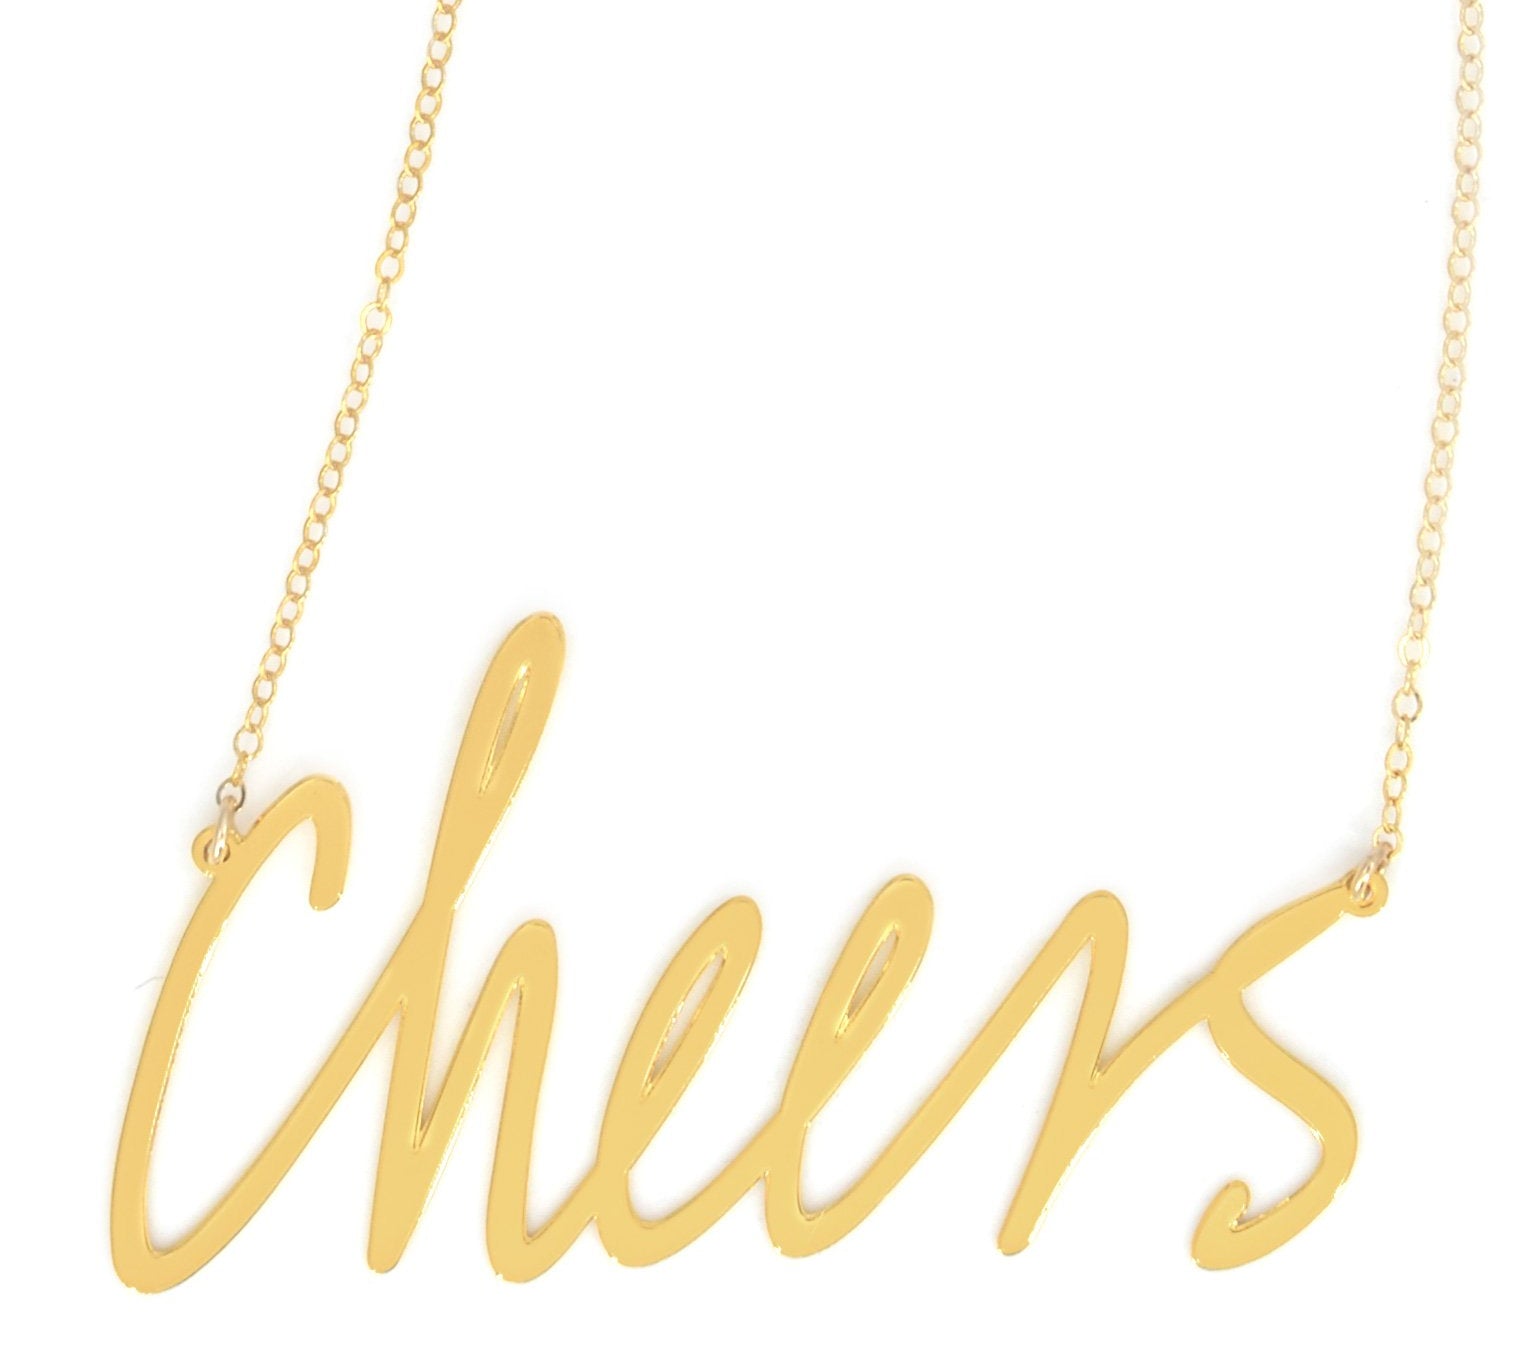 Cheers Necklace - High Quality, Affordable, Hand Written, Self Love, Mantra Word Necklace - Available in Gold and Silver - Small and Large Sizes - Made in USA - Brevity Jewelry